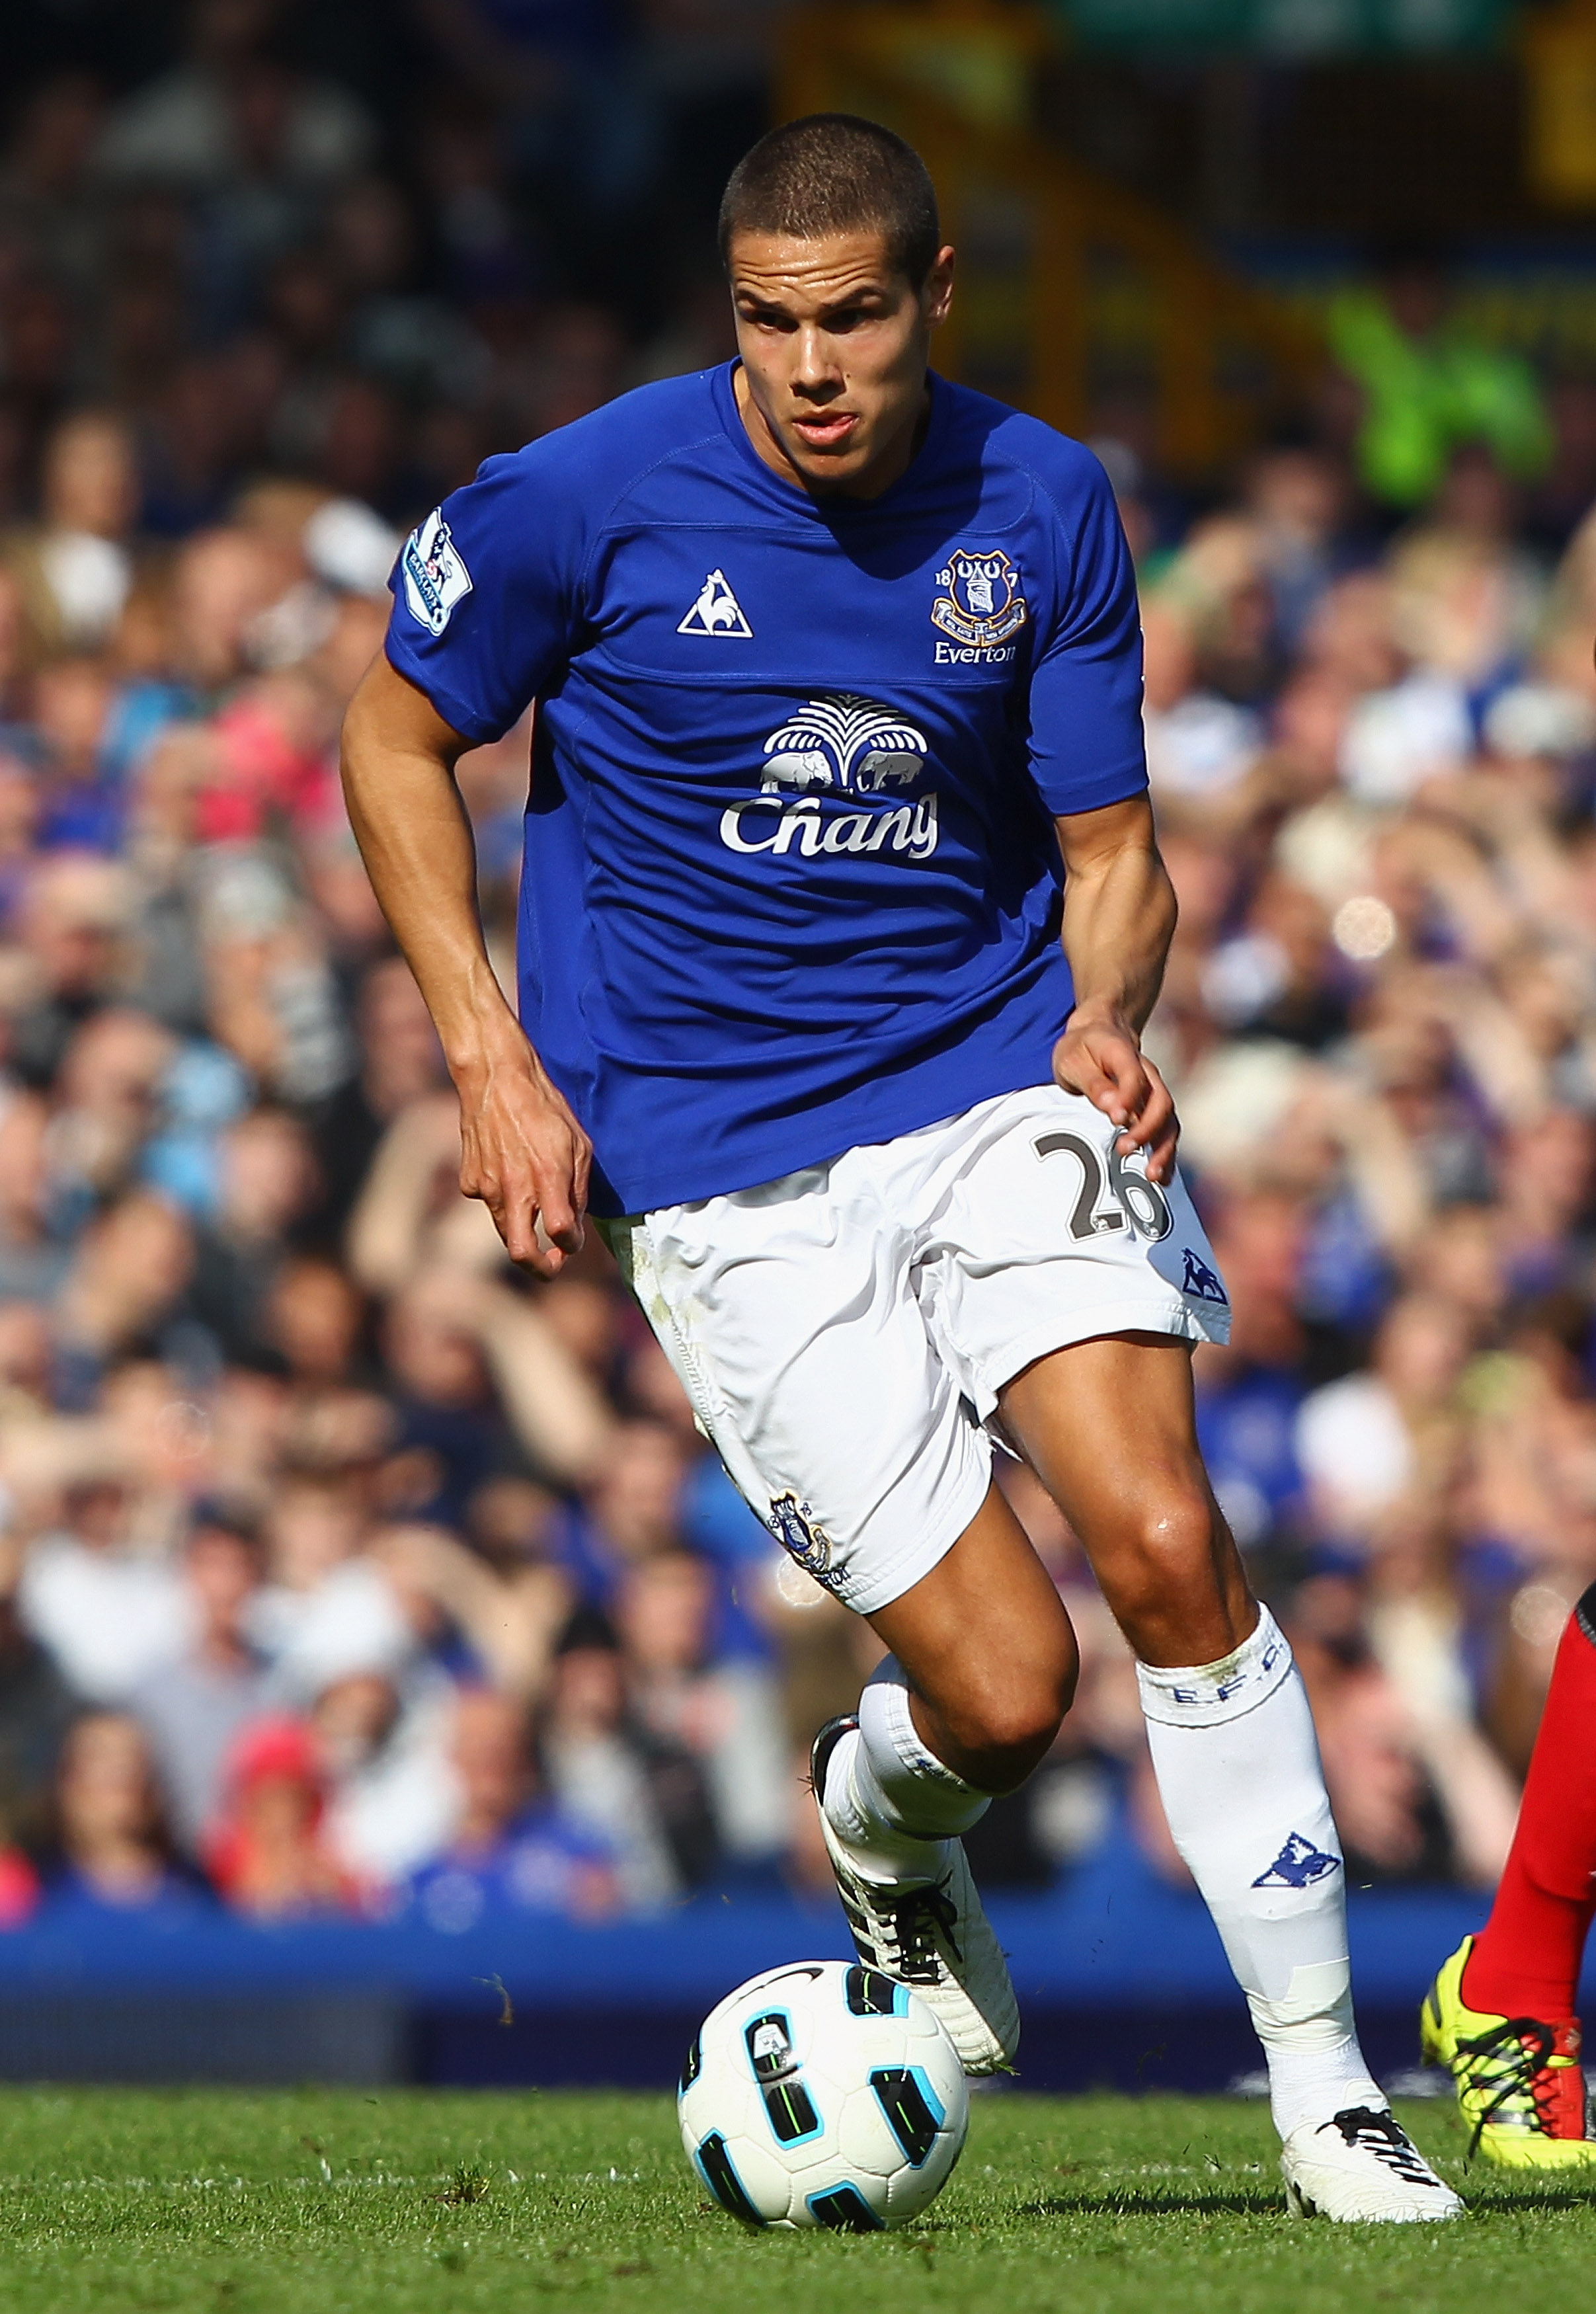 LIVERPOOL, ENGLAND - APRIL 16:  Jack Rodwell of Everton in action during the Barclays Premier League match between Everton and Blackburn Rovers at  Goodison Park on April 16, 2011 in Liverpool, England.  (Photo by Clive Brunskill/Getty Images)